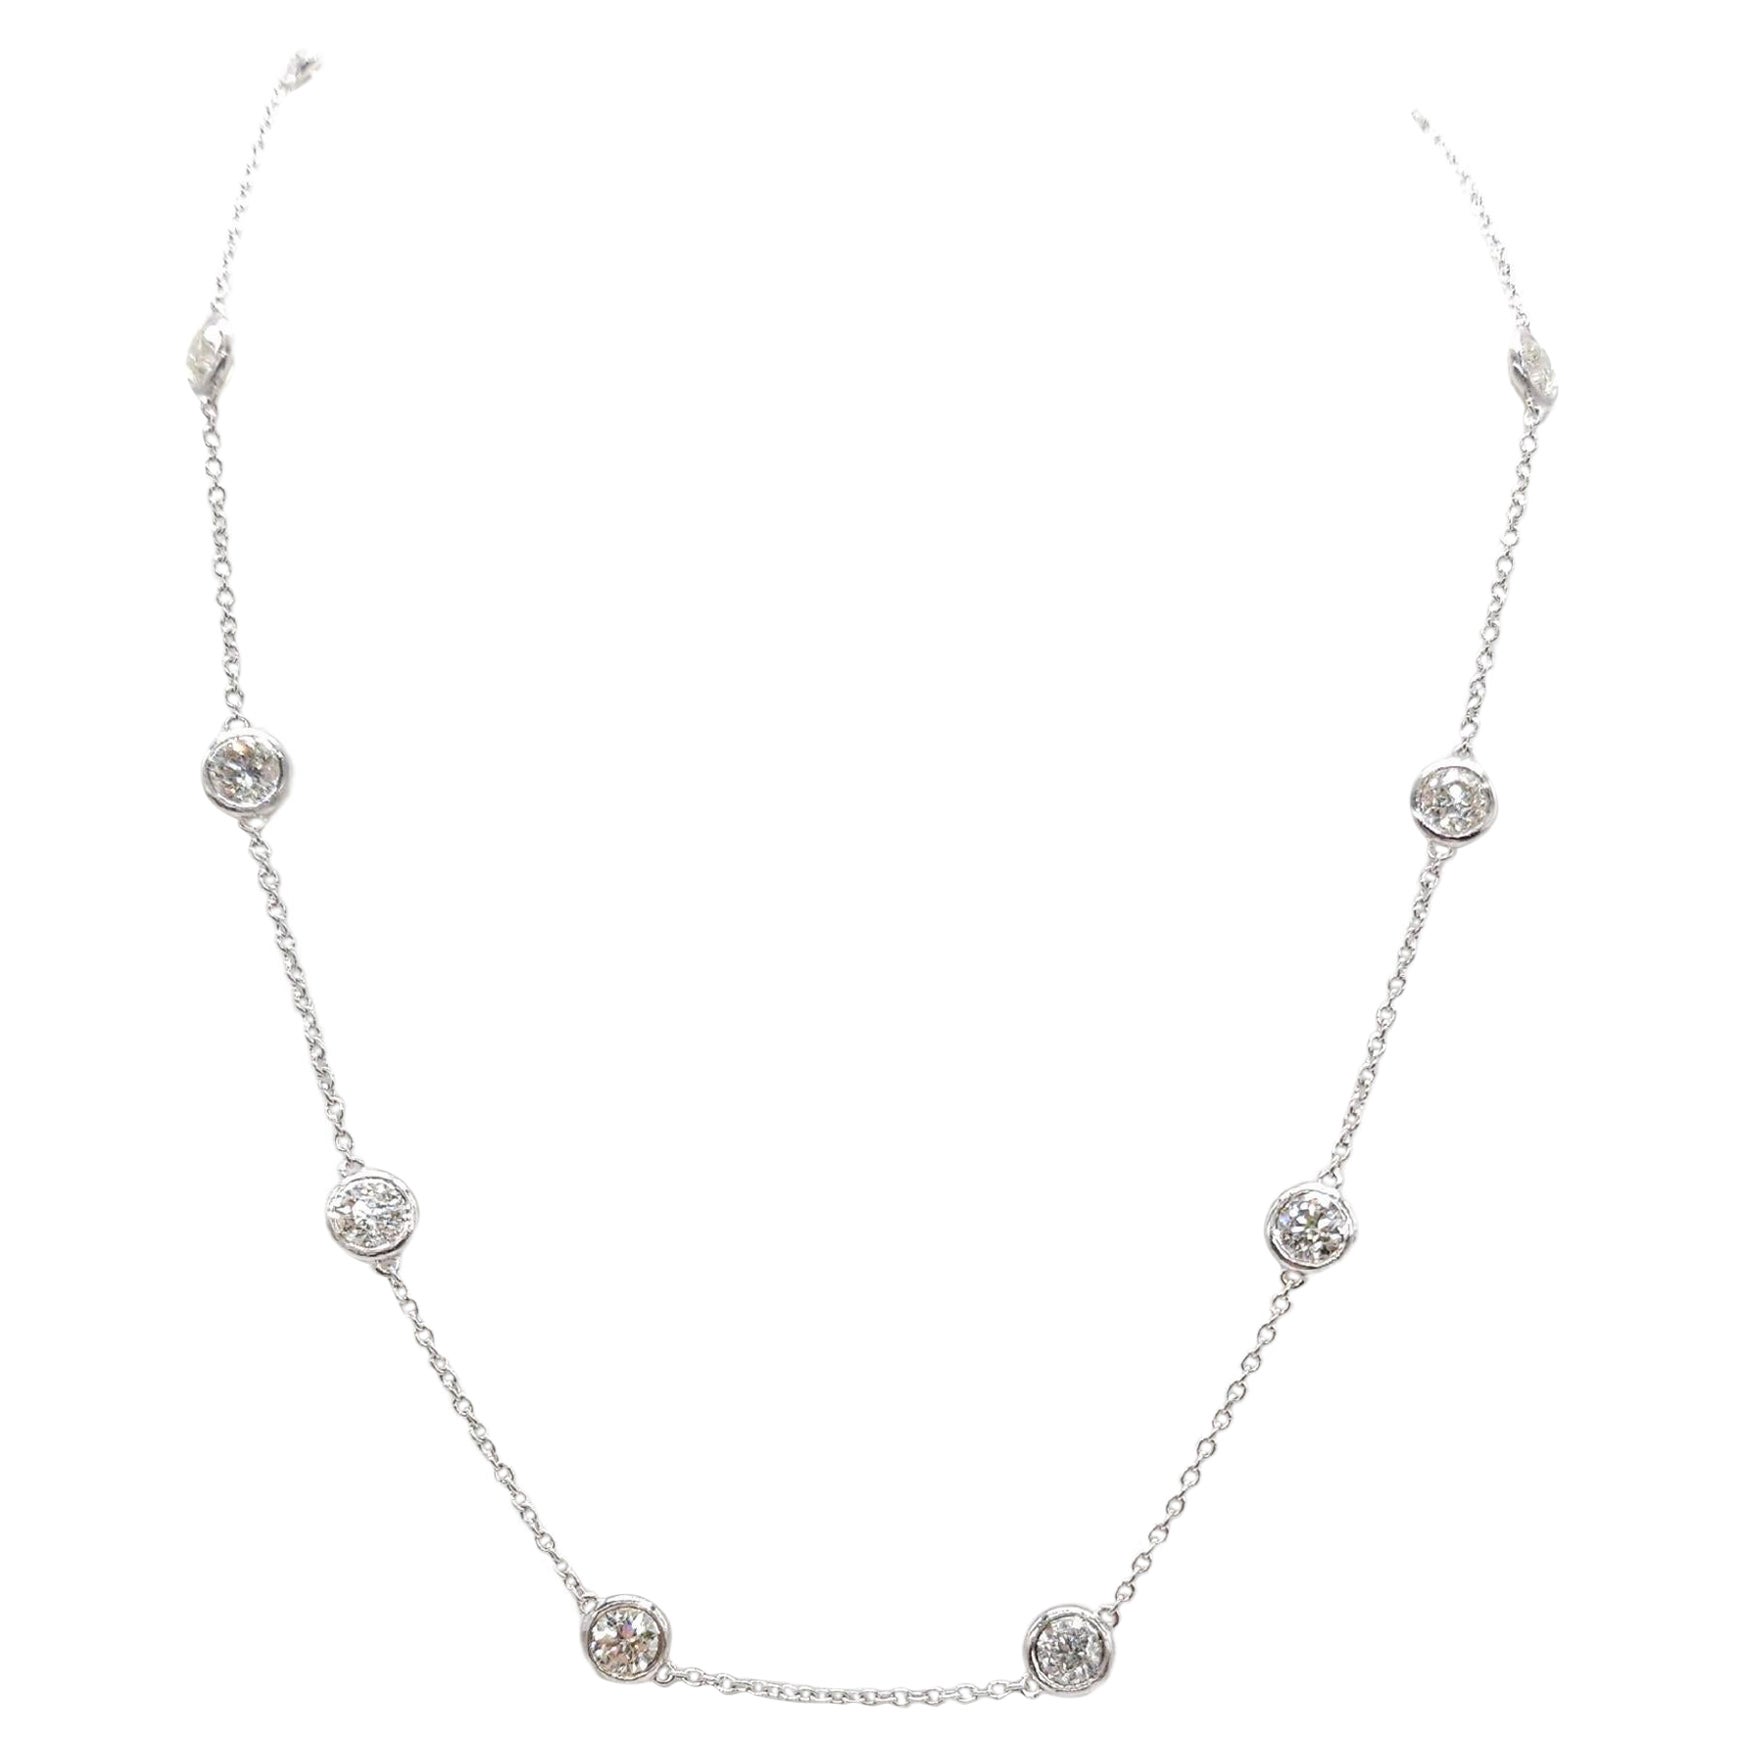 5.03 Carat 10 Station Diamond by the Yard Necklace 14 Karat White Gold 16" (collier en or blanc 14 carats)